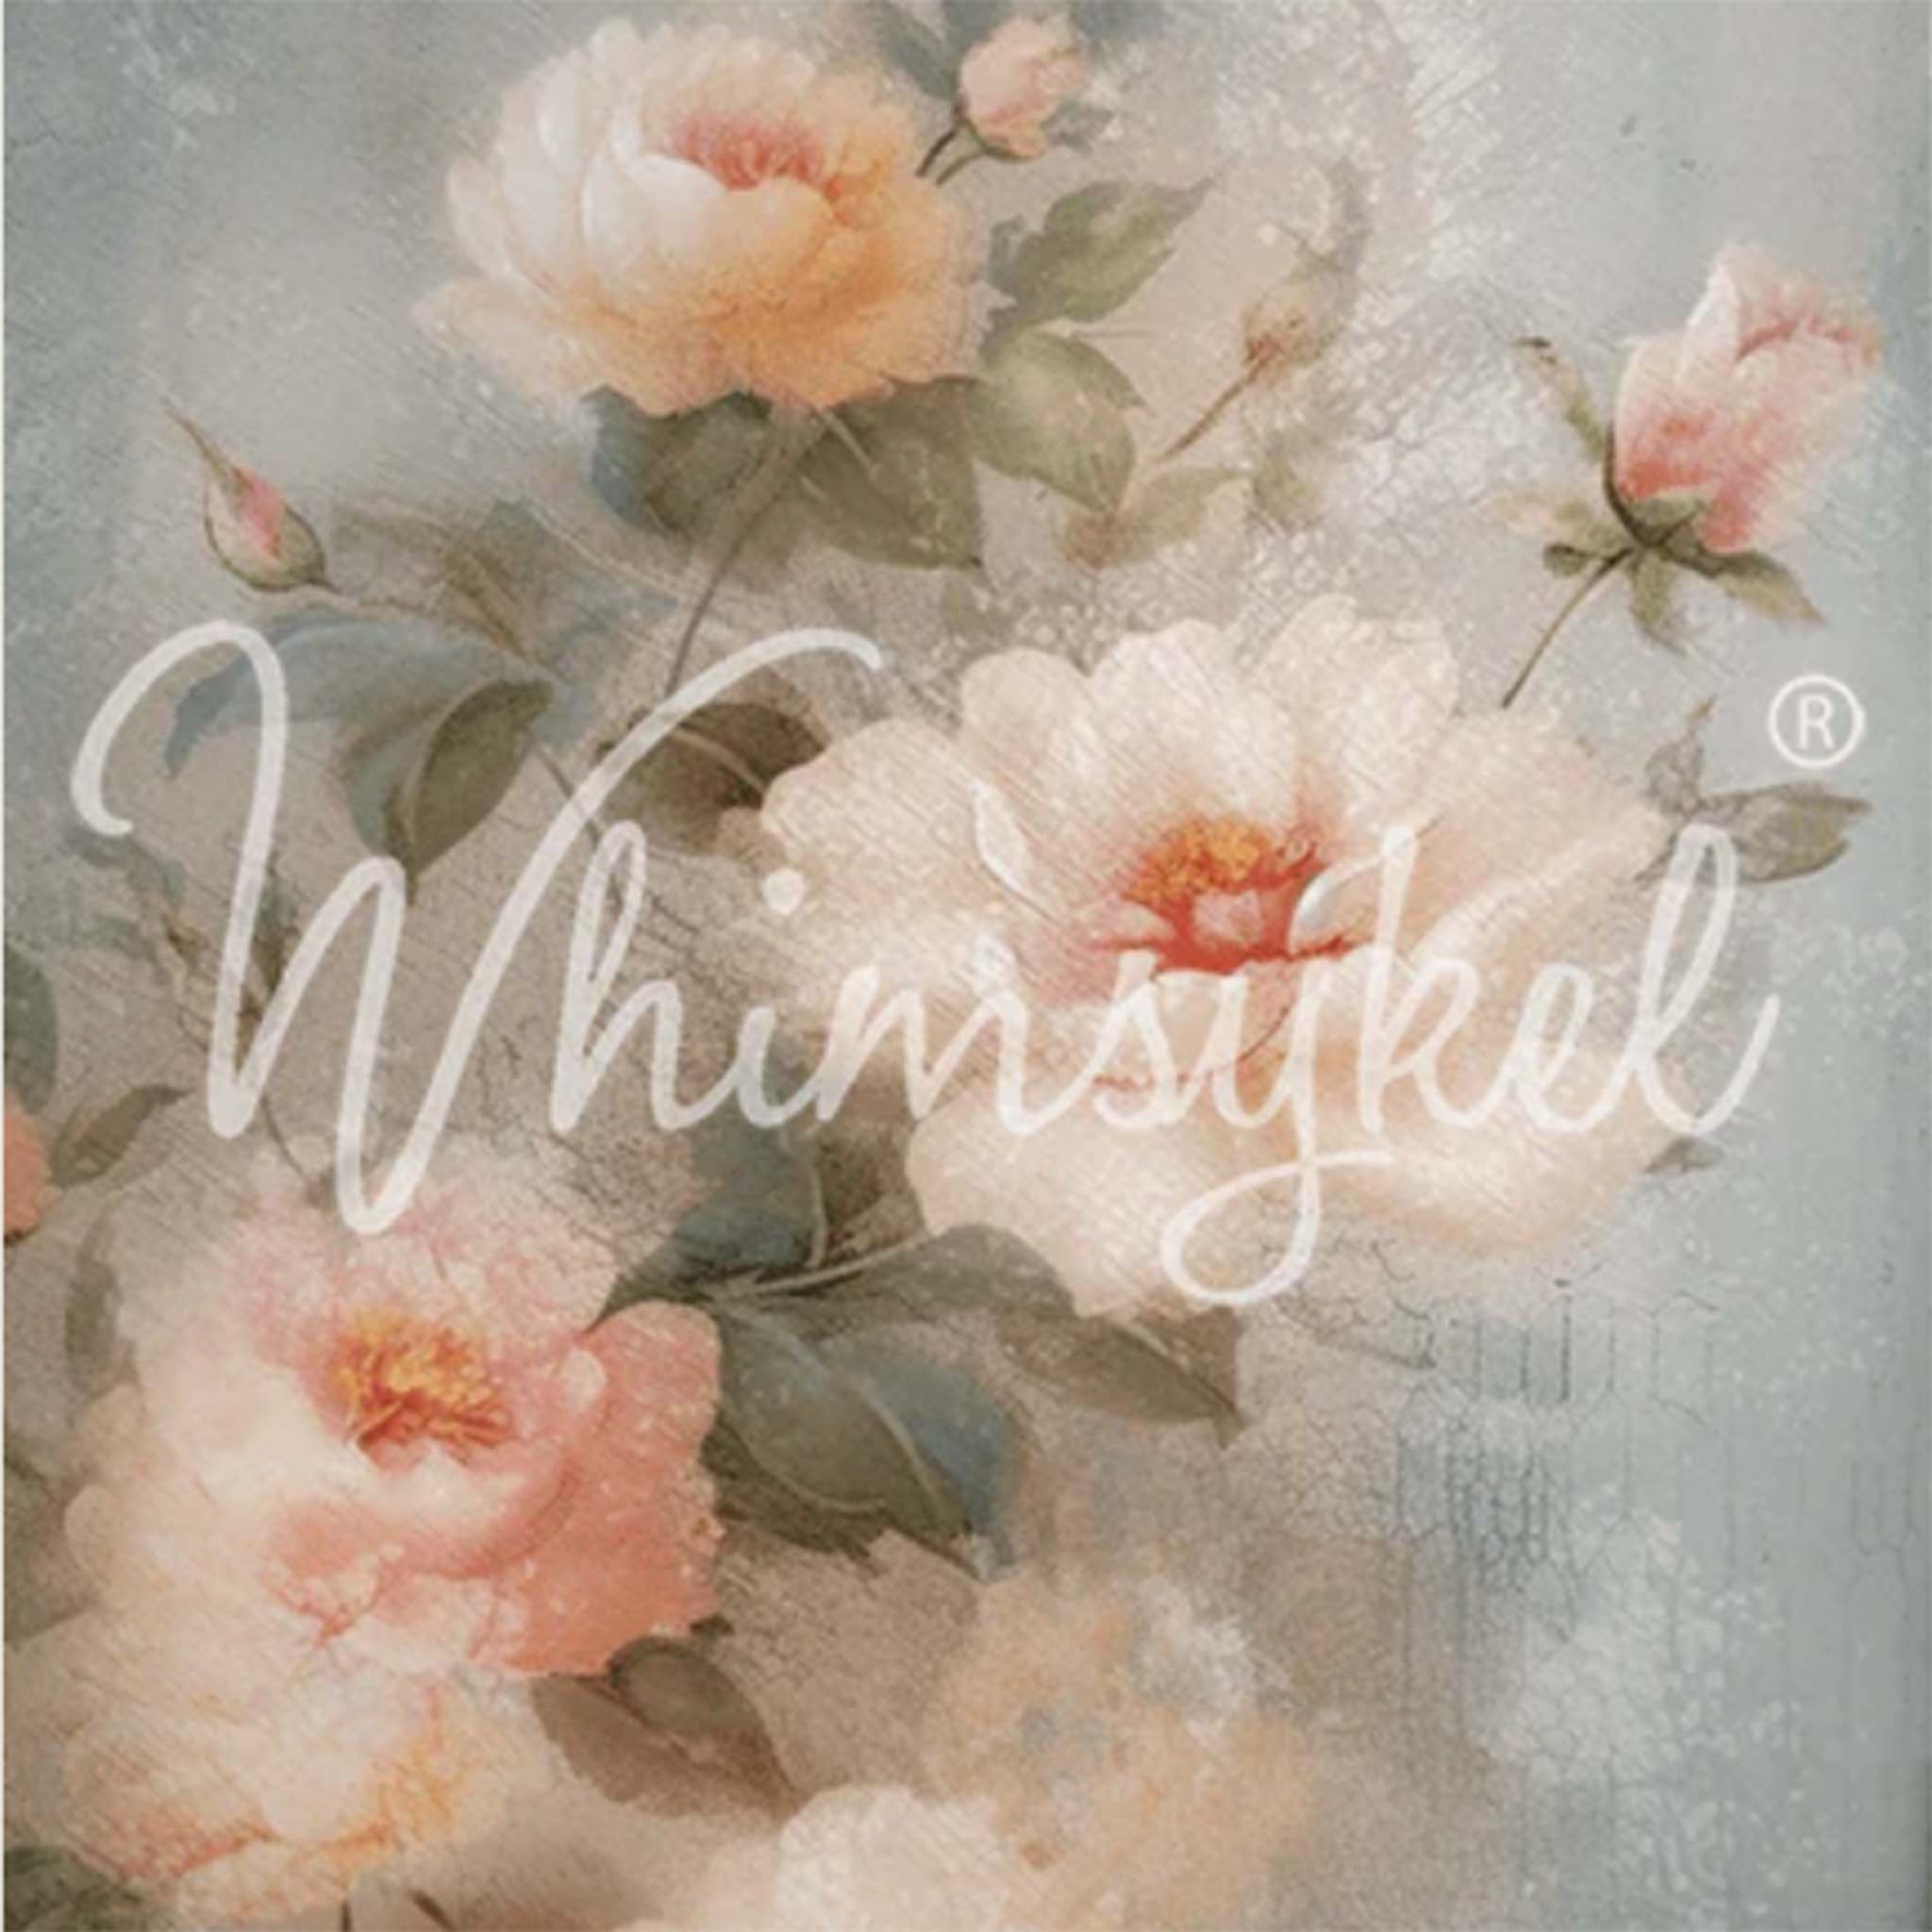 Close-up of a tissue paper design that features a beautifully aged painting of roses in soft, muted colors against a grey background.